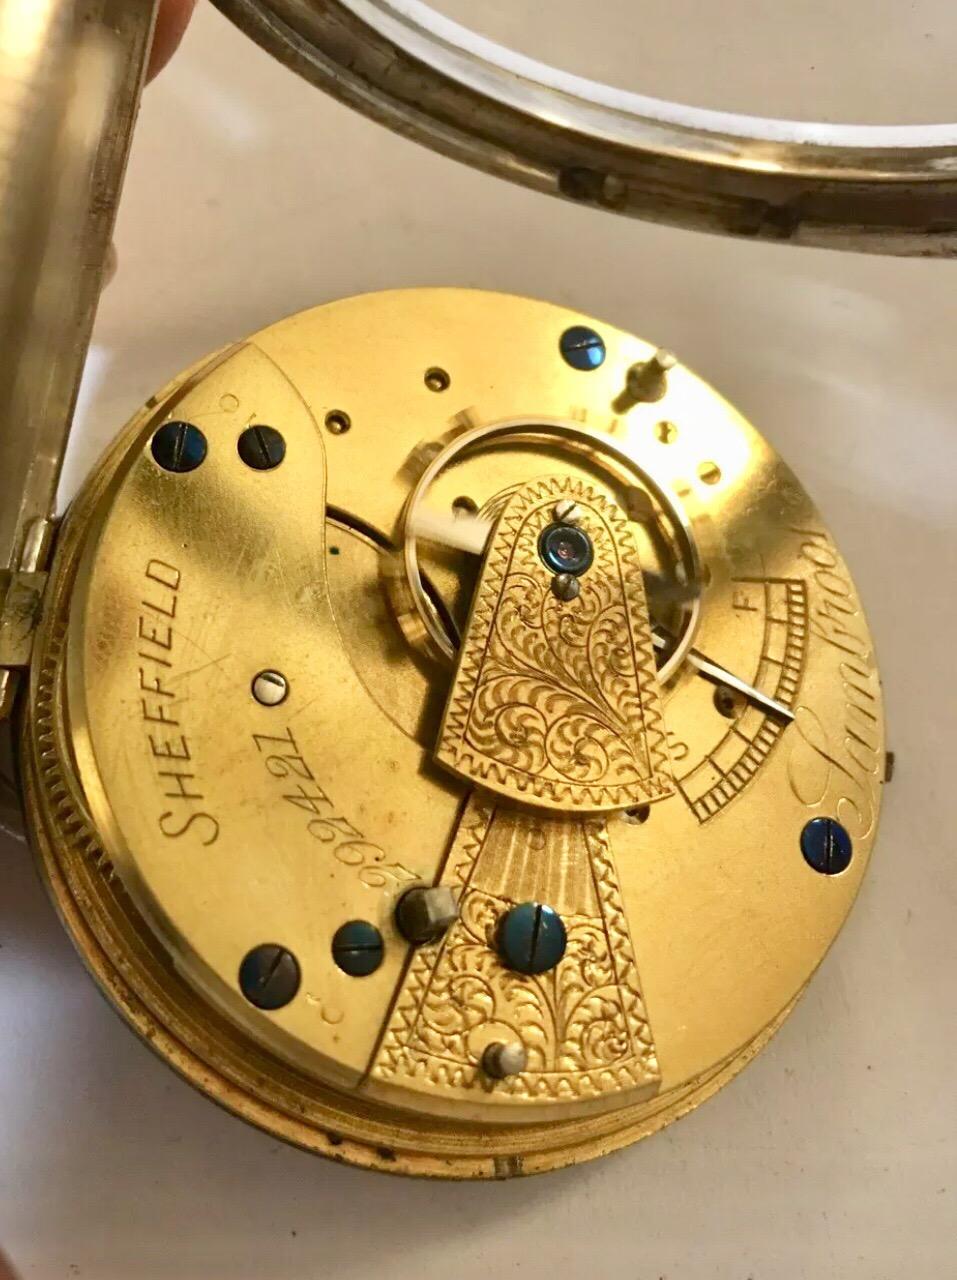 An English Fusee Silver Pocket Watch By Sambrooks, Sheffield For Spares Or Repair.This heavy English silver watch is working and ticking well. Needs minute and secondary hands.